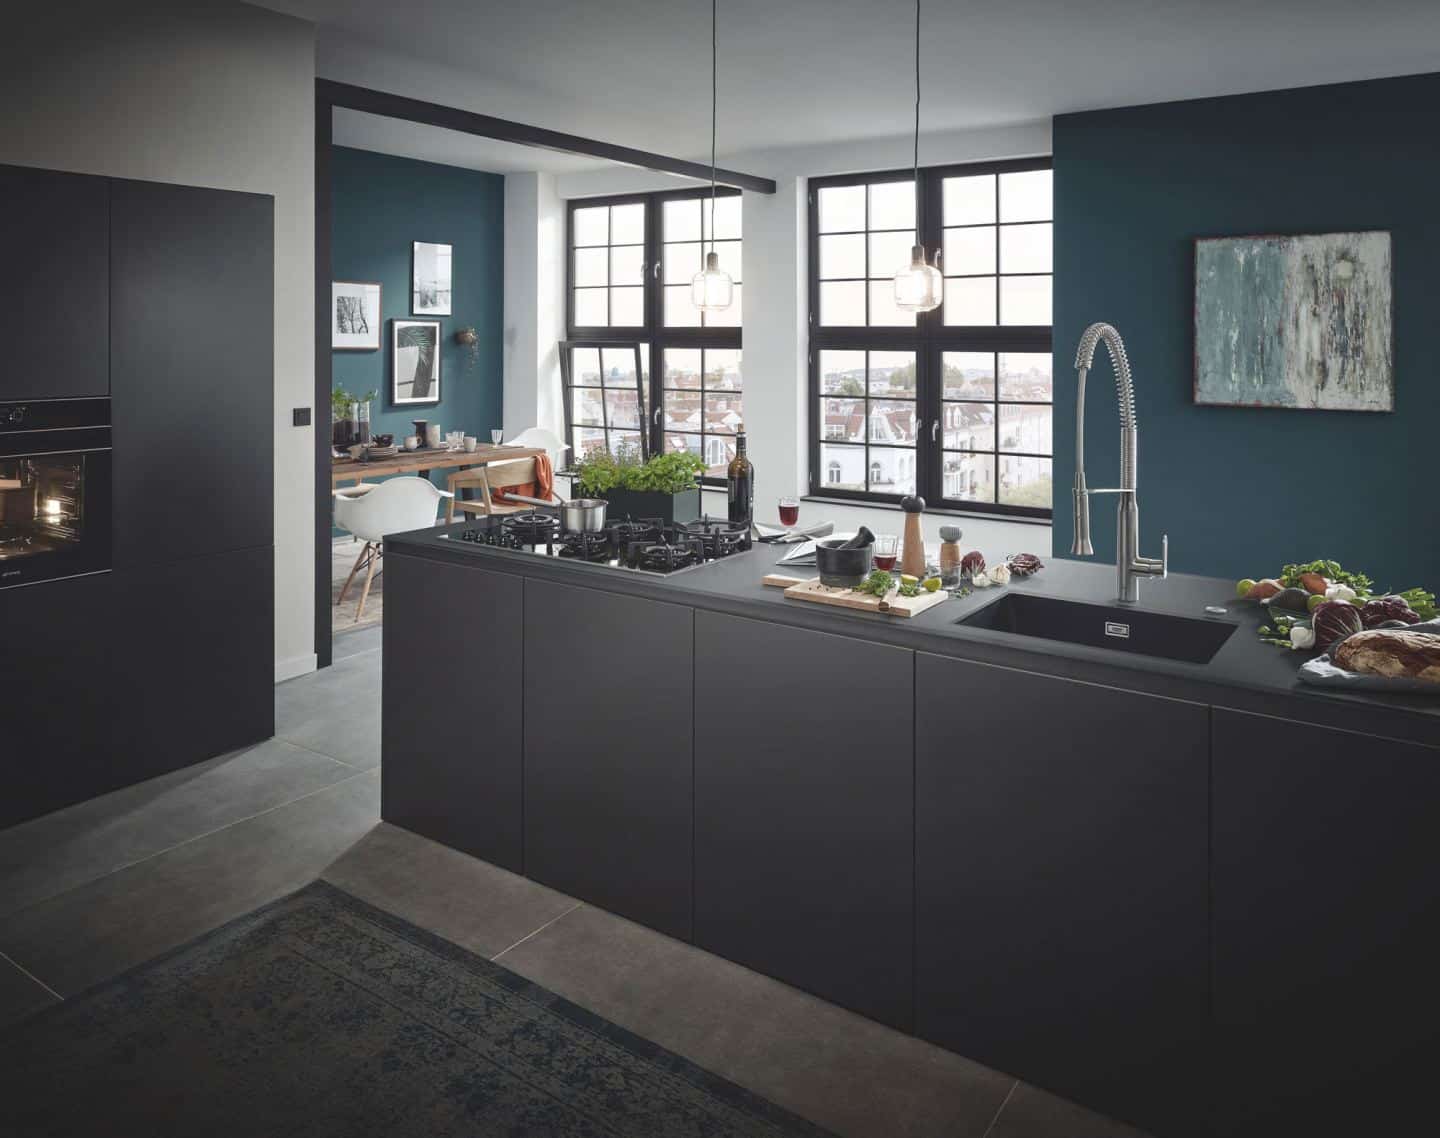 Kitchen design trends - composite sinks by Grohe